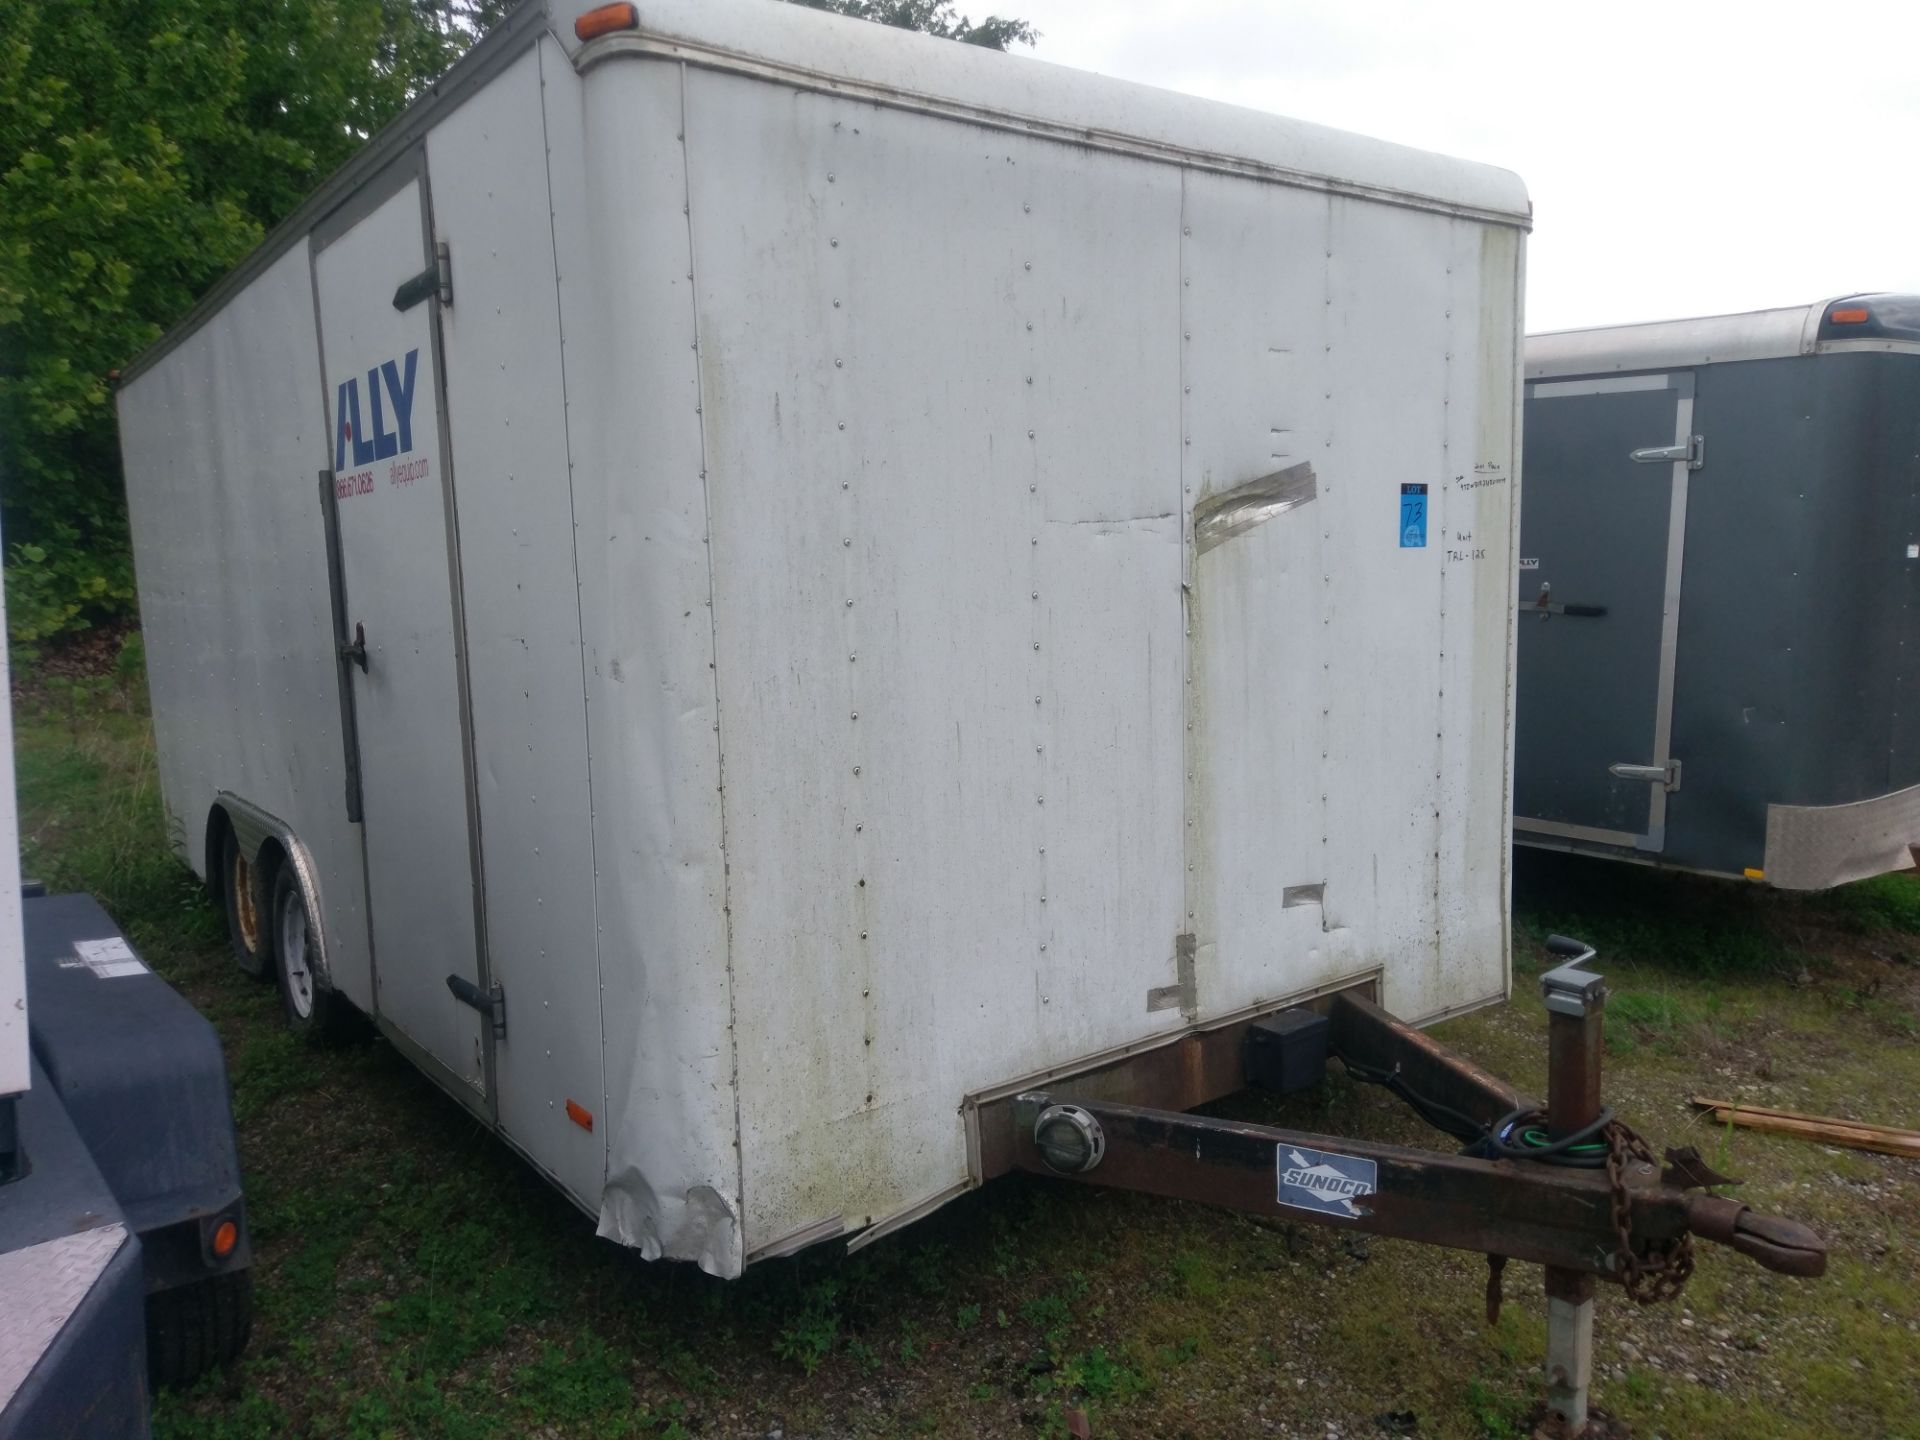 2001 PACE TANDEM AXLE ENCLOSED TRAILER; VIN # 47ZWB18231X011149, BALL HITCH, 8' X 18', REAR FOLD - Image 2 of 4